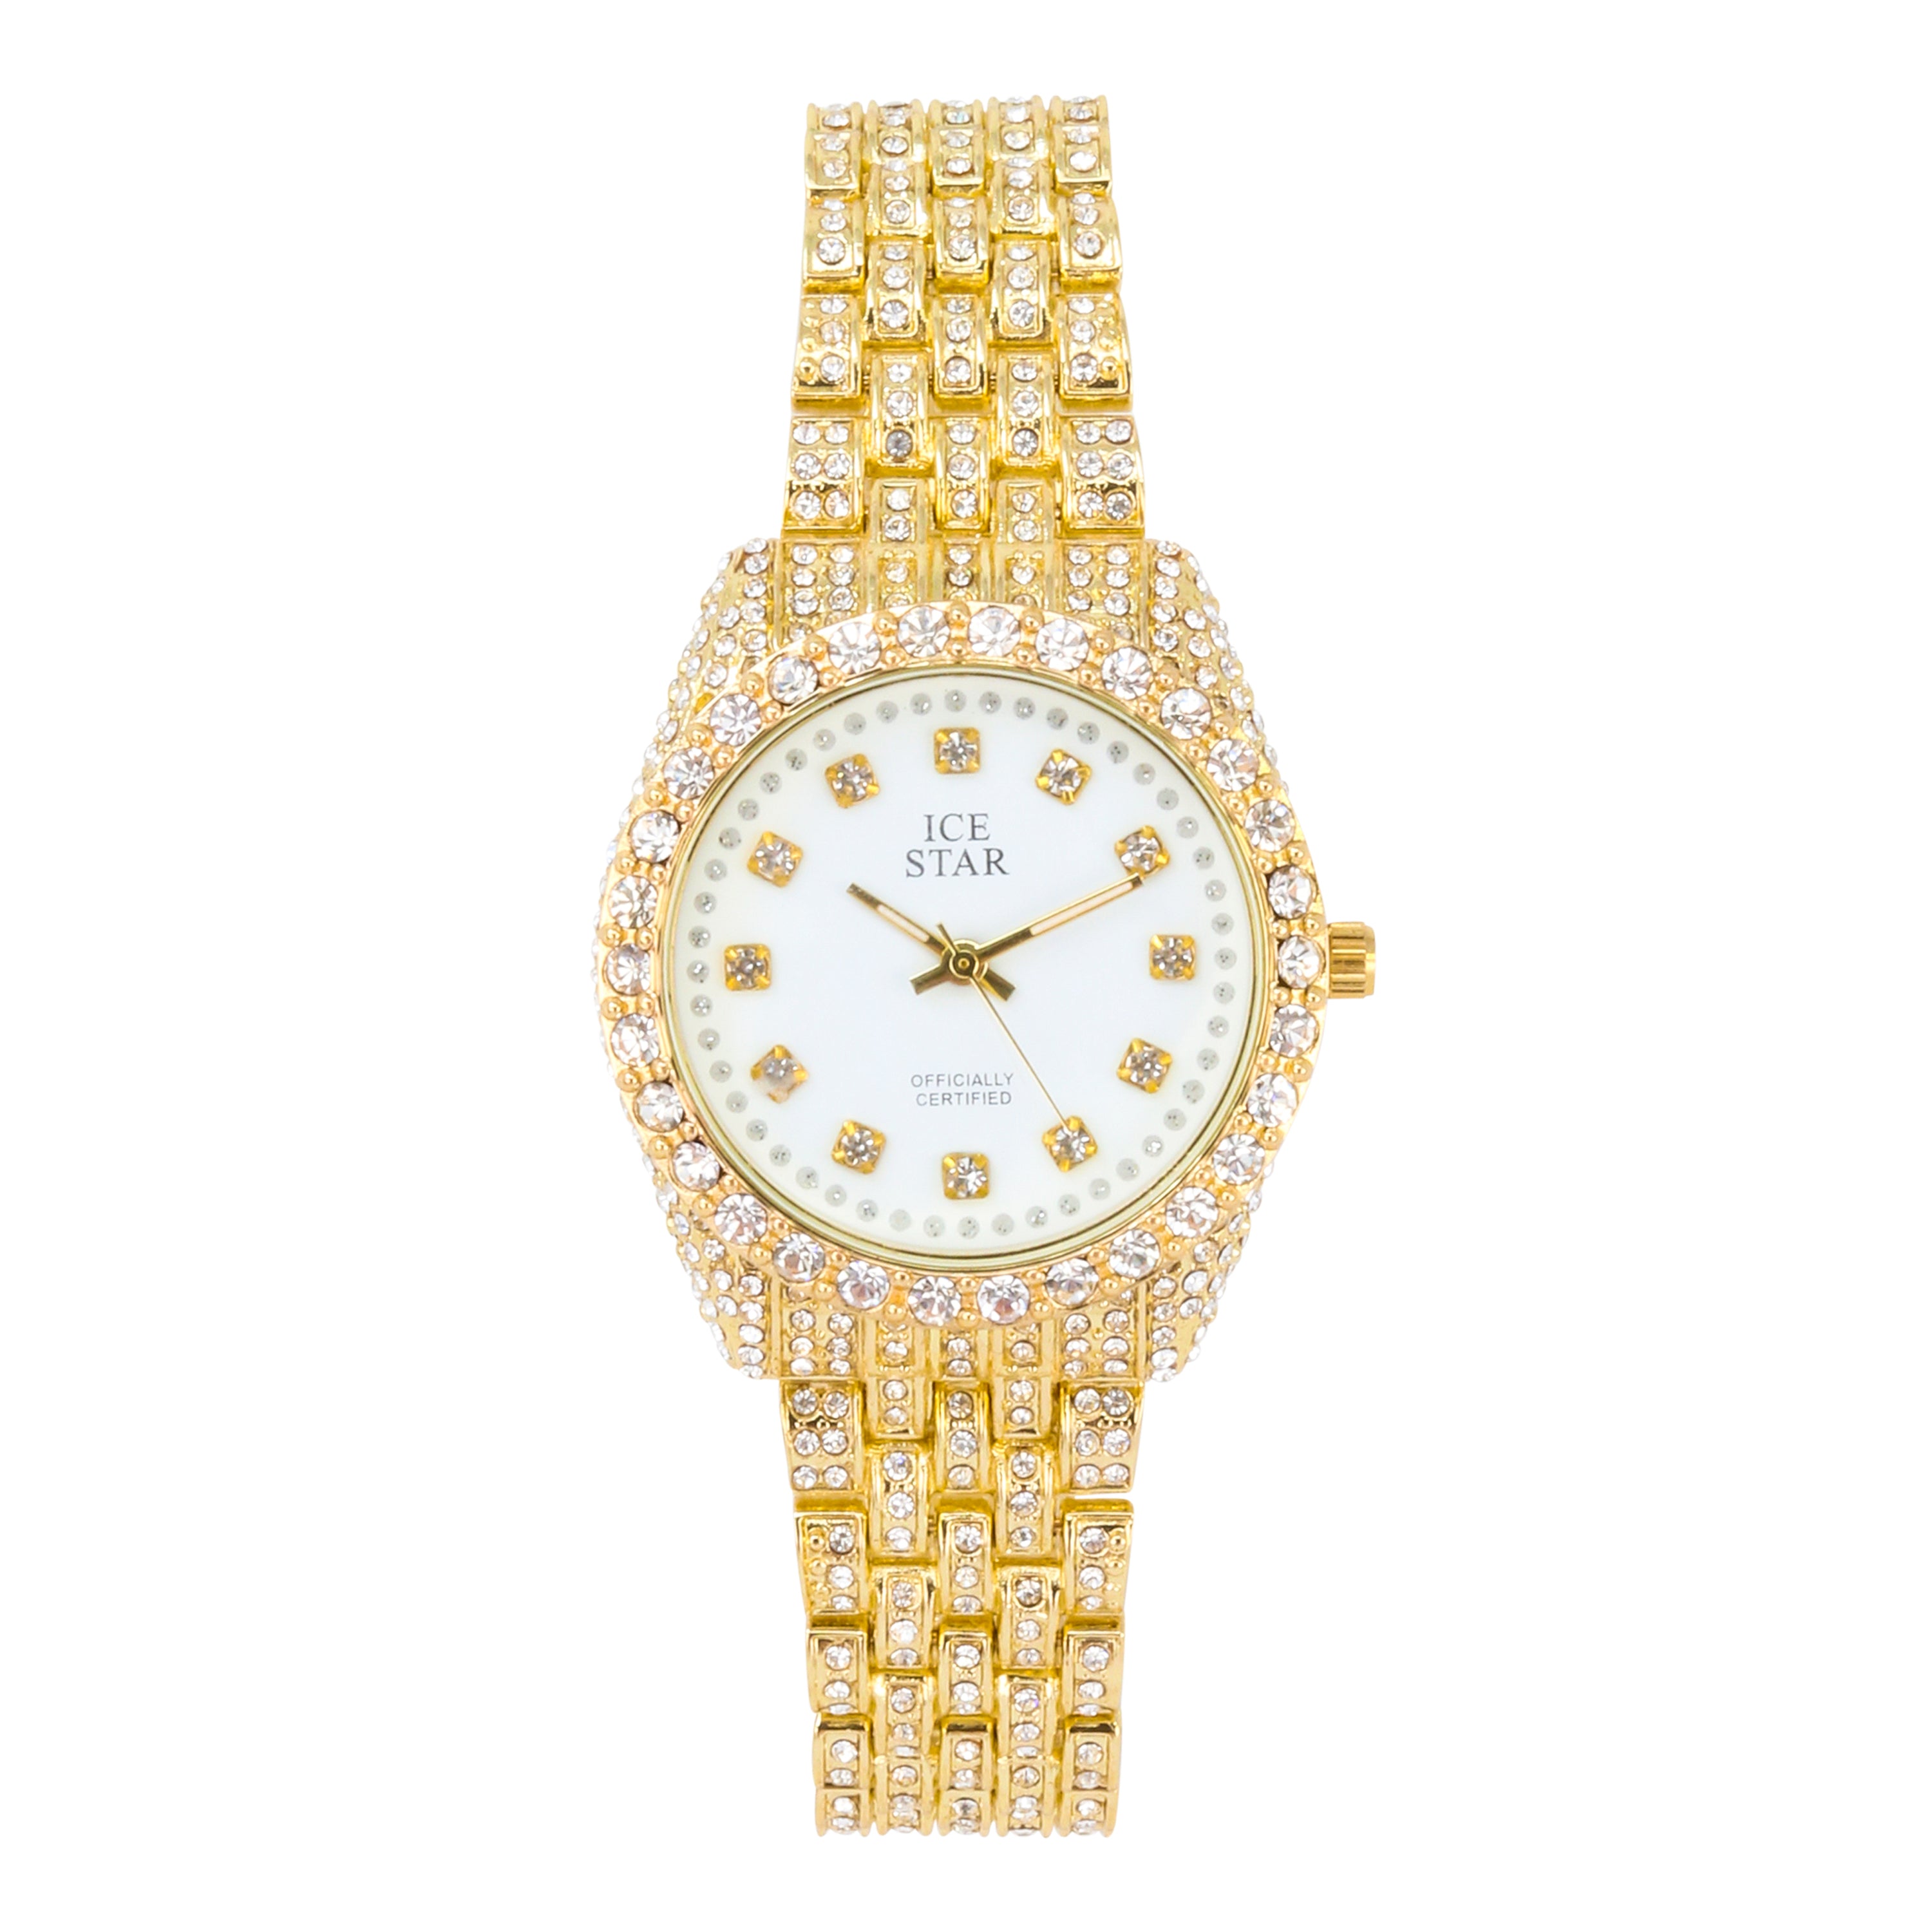 Women's Round Iced Out  Watch 32mm Gold